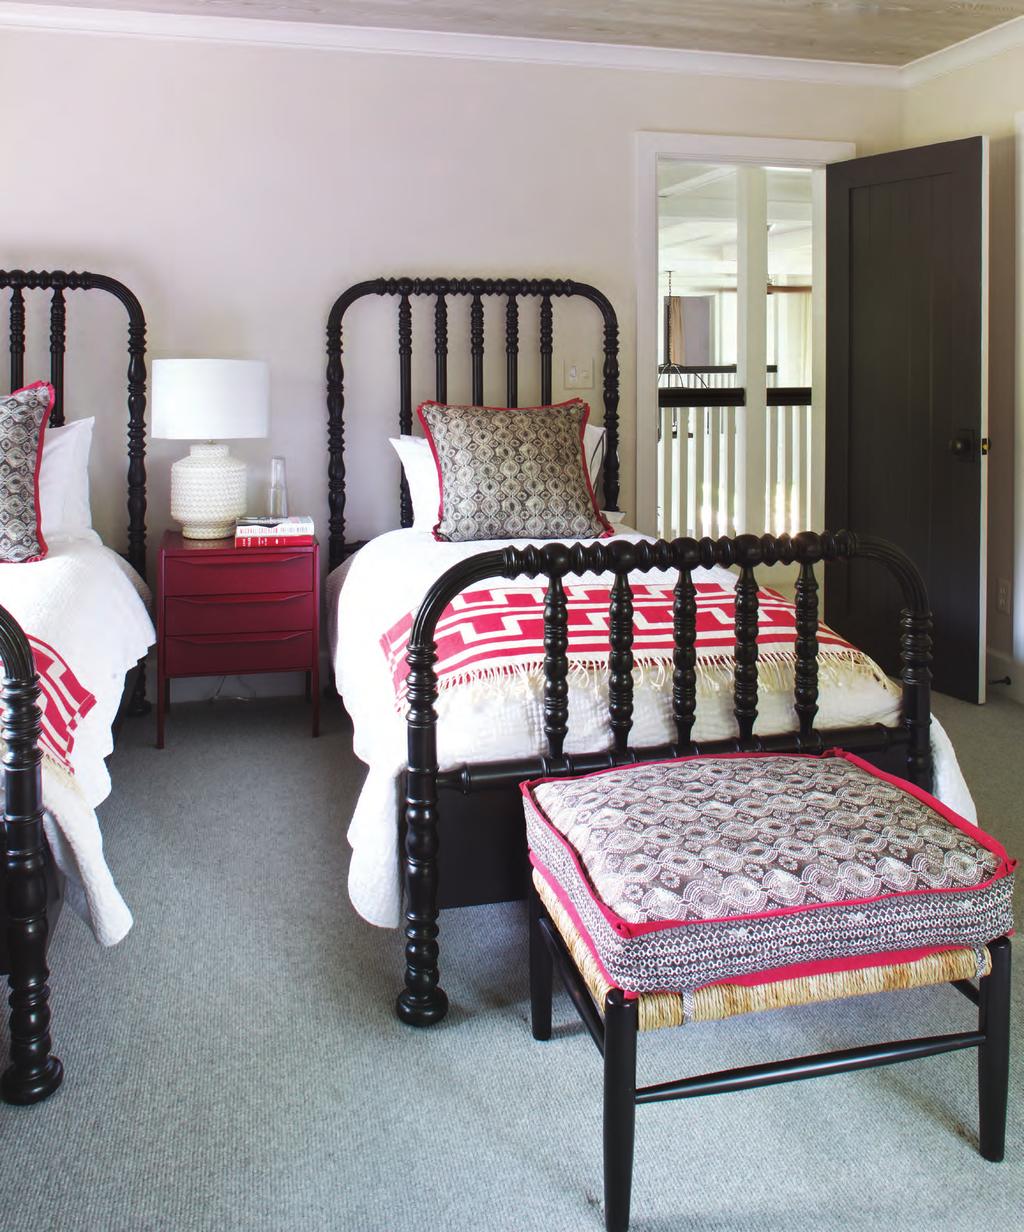 Double The Fun One guest room is furnished with twin beds from Noir Furniture. Lexington Clothing Company throws complement a Redford House ottoman in an Osborne & Little fabric.